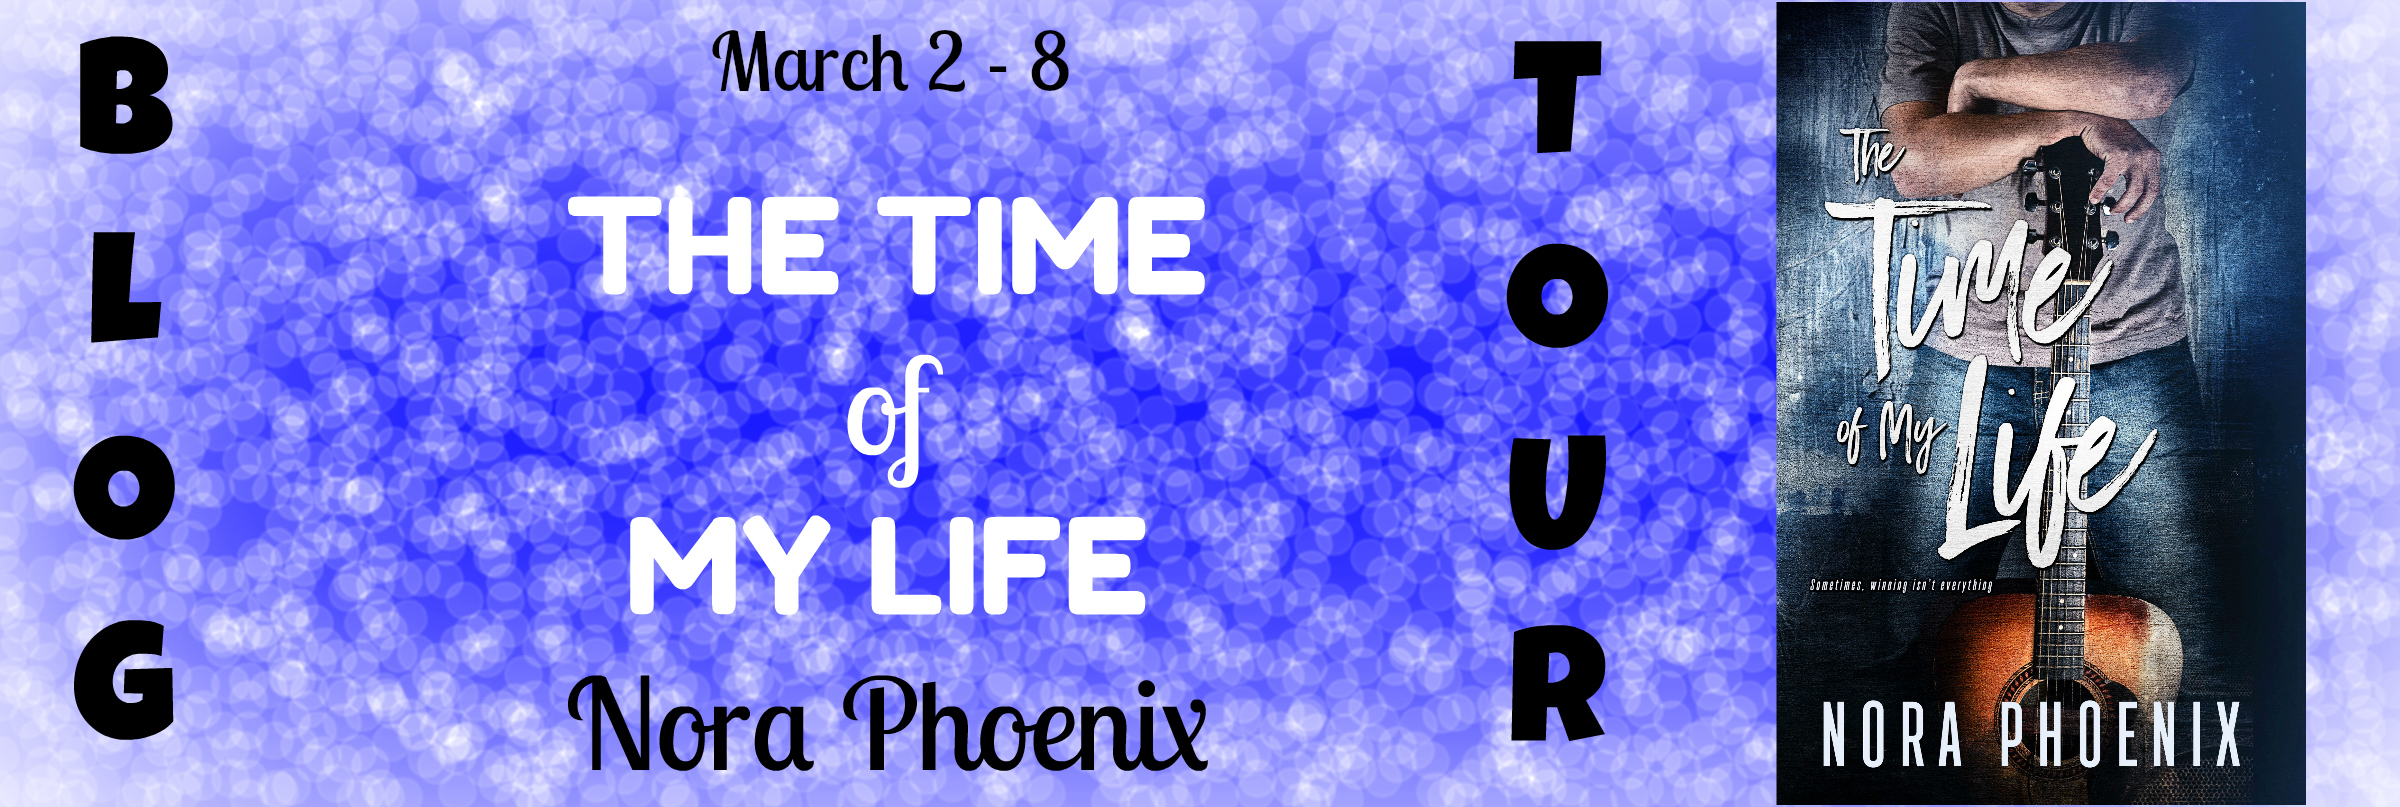 The Time of My Life Tour Banner